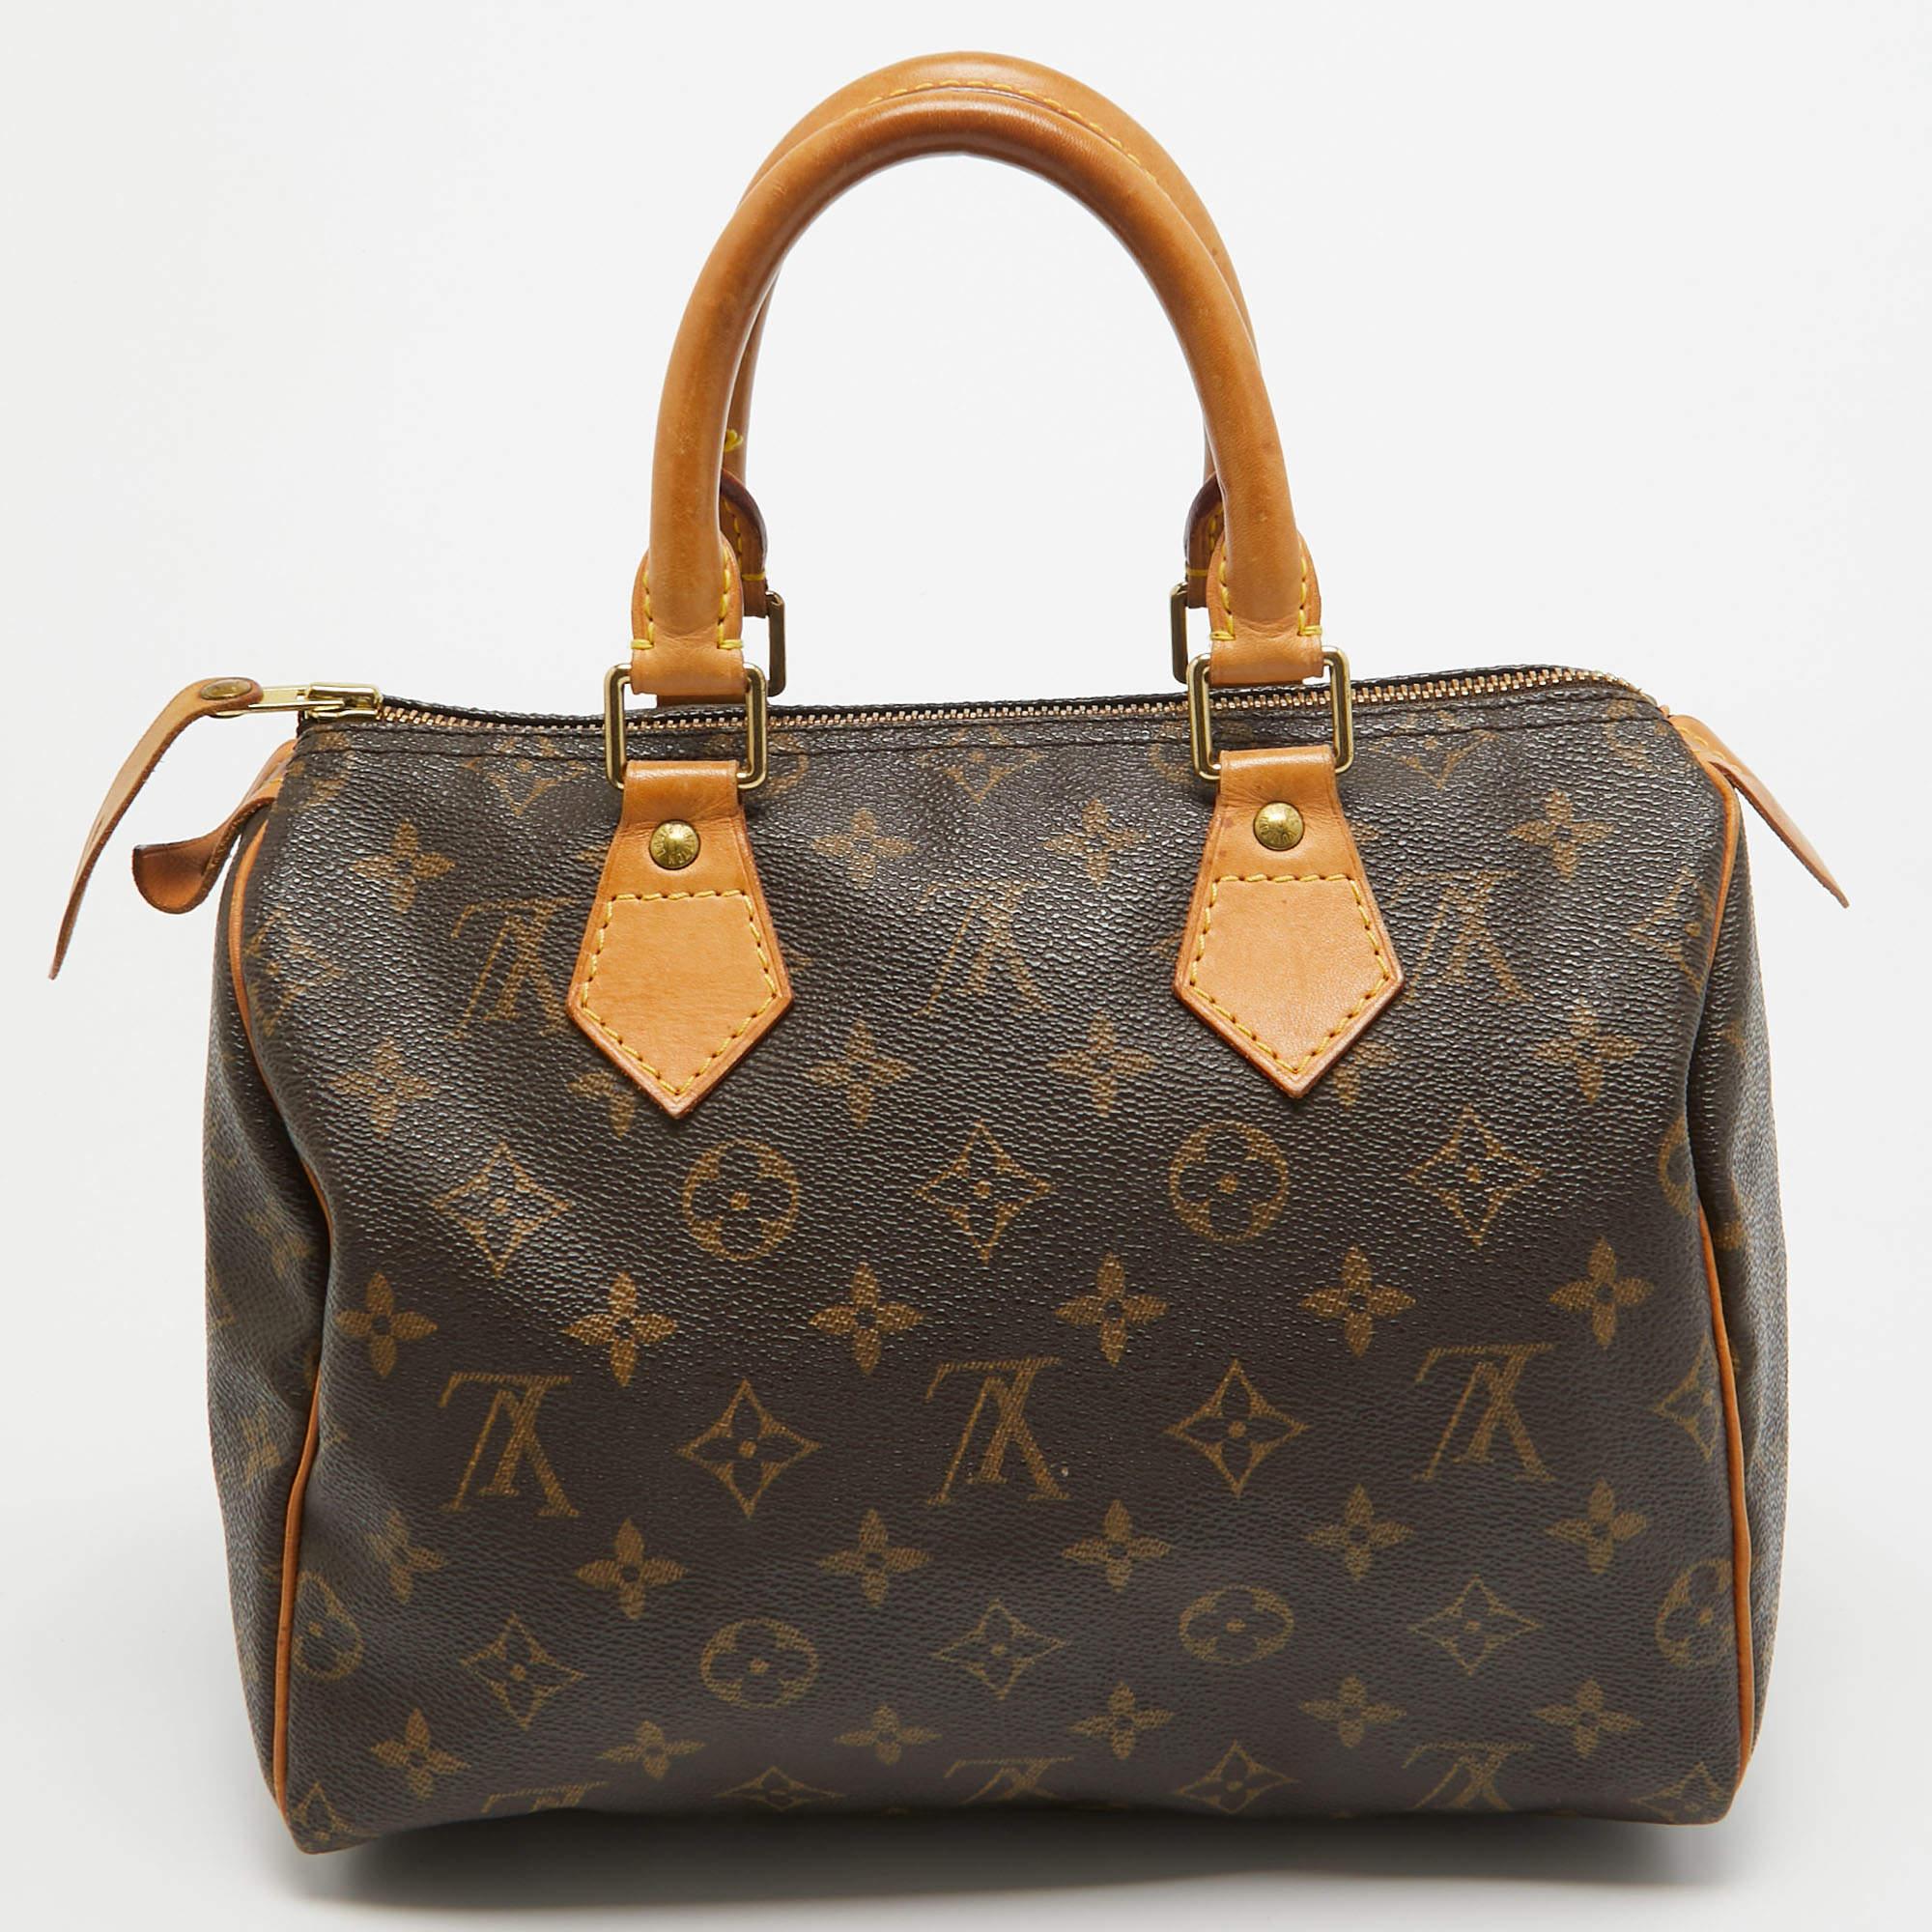 The iconic Speedy from Louis Vuitton was first created for everyday use as a smaller version of their famous Keepall bag. We have here the Speedy 25 in monogram canvas! This Speedy comes crafted from coated canvas as well as leather with two handles